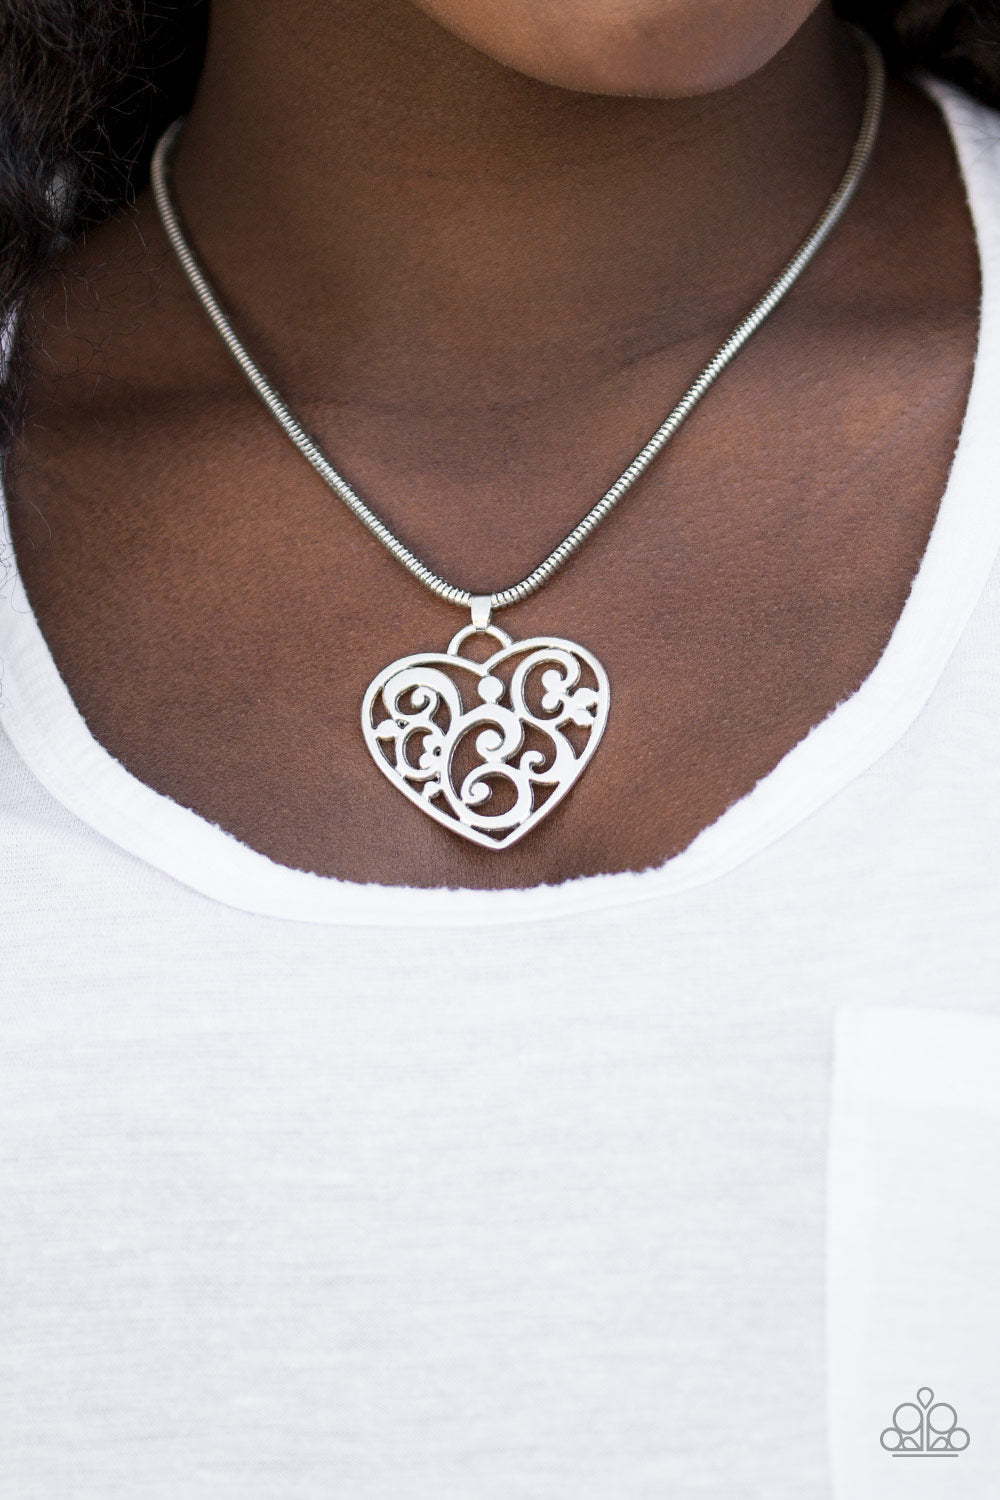 FILIGREE Your Heart With Love - Silver - Necklace